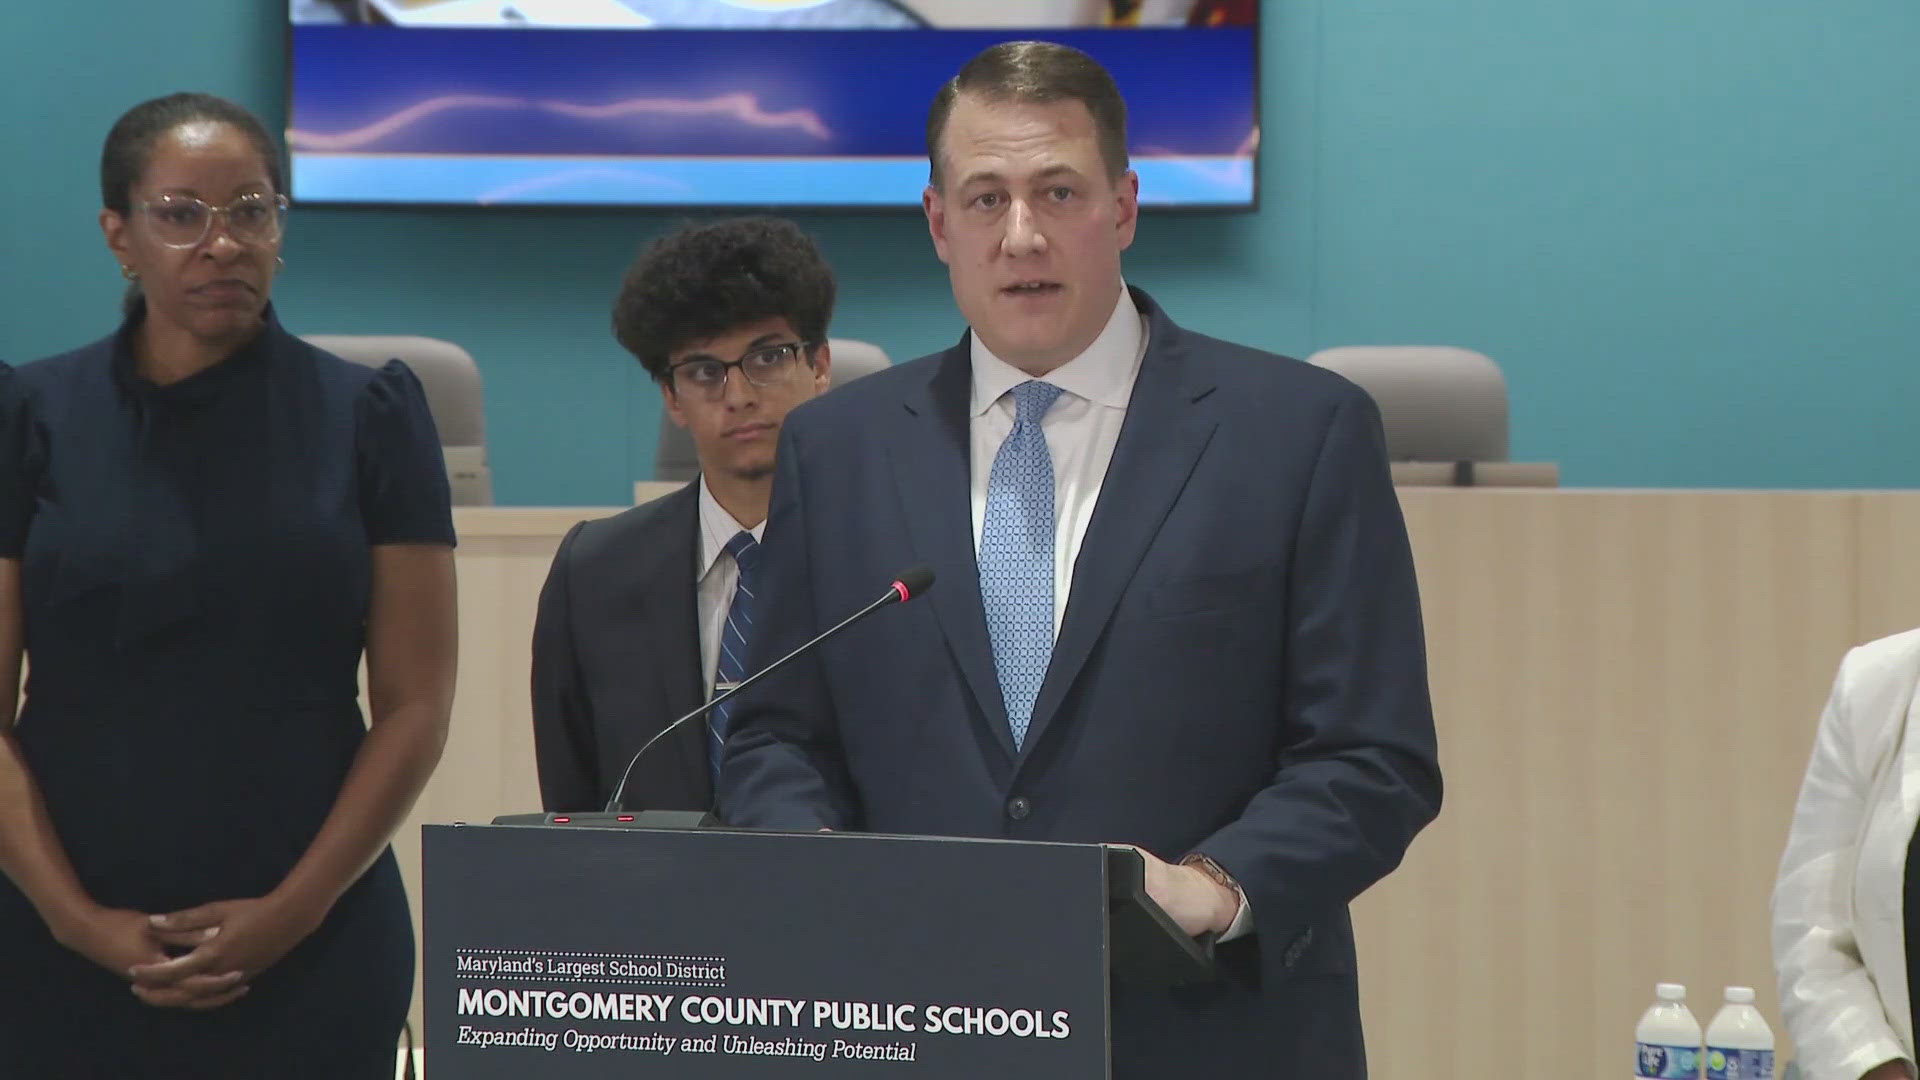 Montgomery County's Board of Education announced that Dr. Thomas Taylor will be appointed for the role.